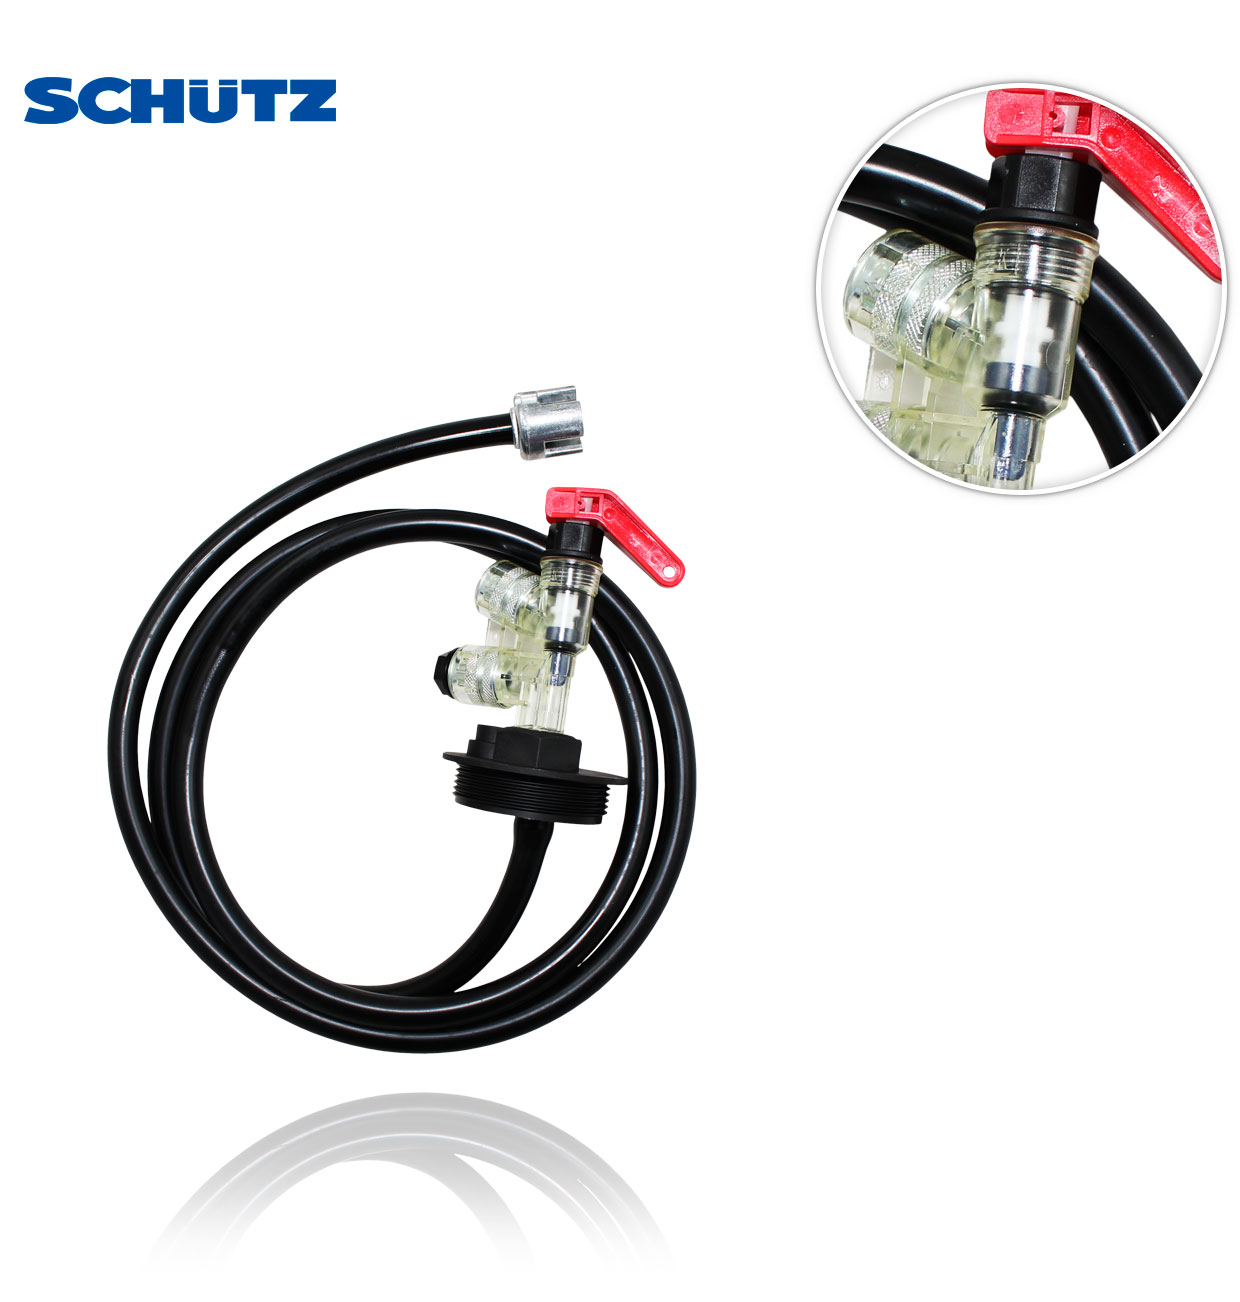 SCHUTZ SIMPLE SUCTION KITS FOR TANKS